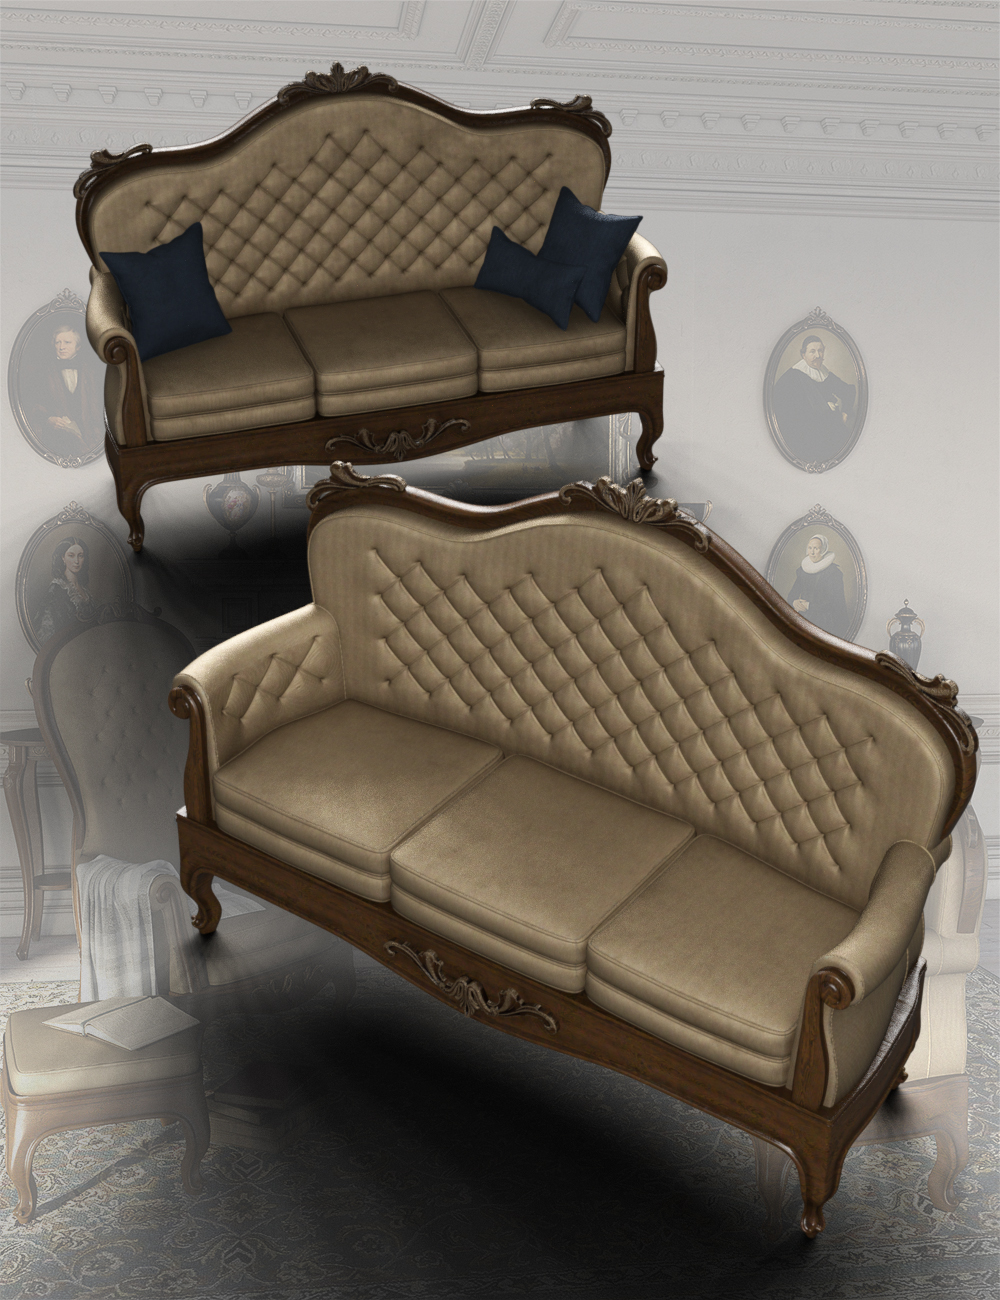 Victorian Decor 3 Iray by: LaurieS, 3D Models by Daz 3D